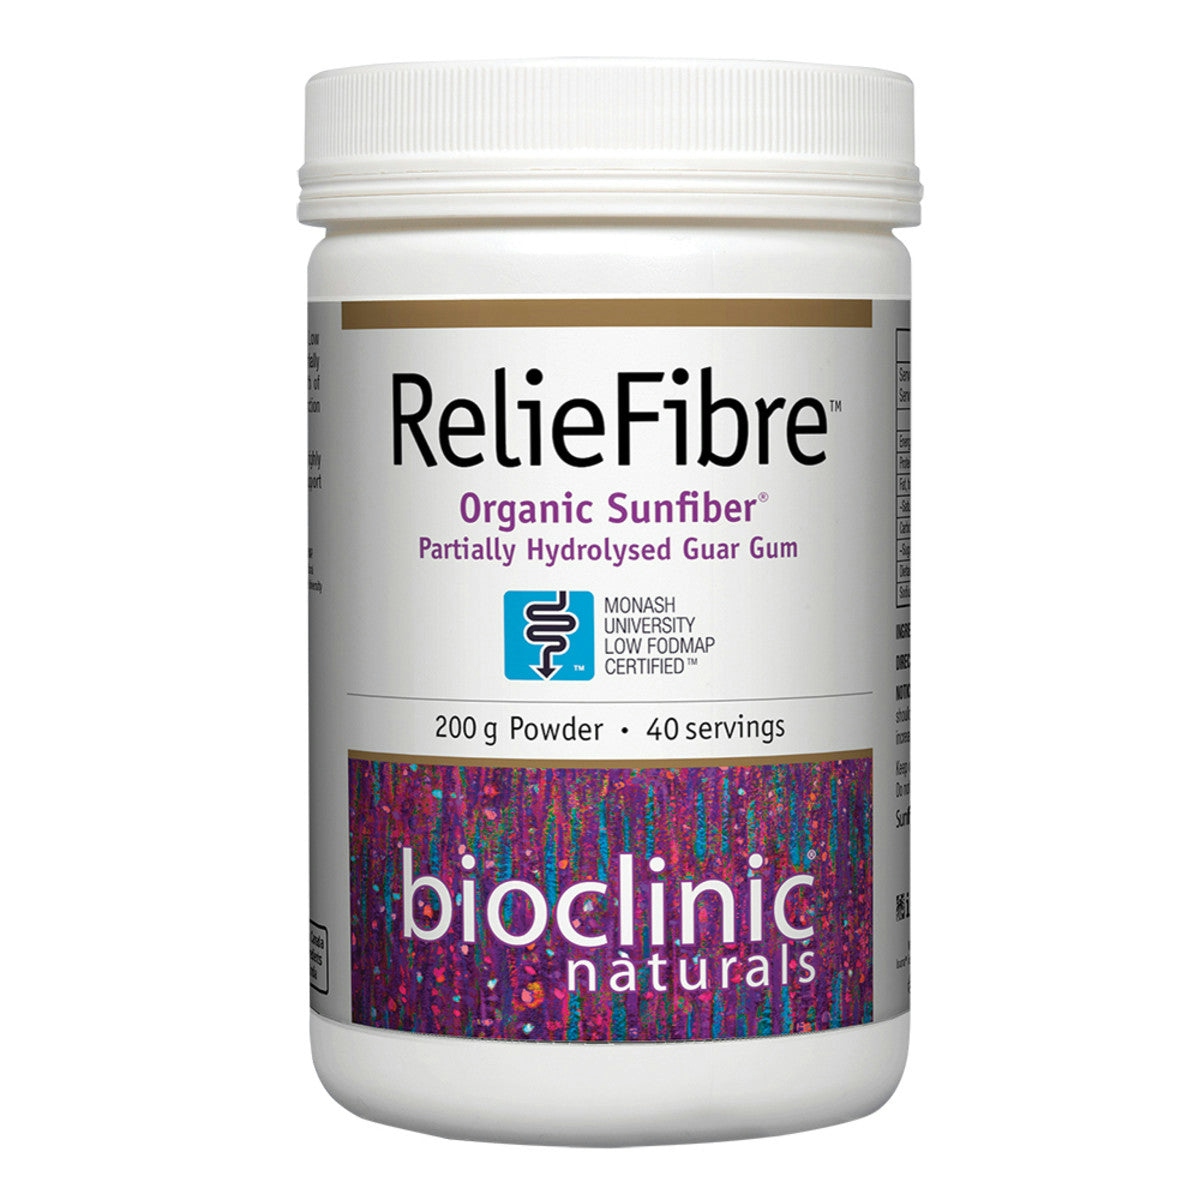 Image of Bioclinic Naturals Reliefibre 200g with a white background